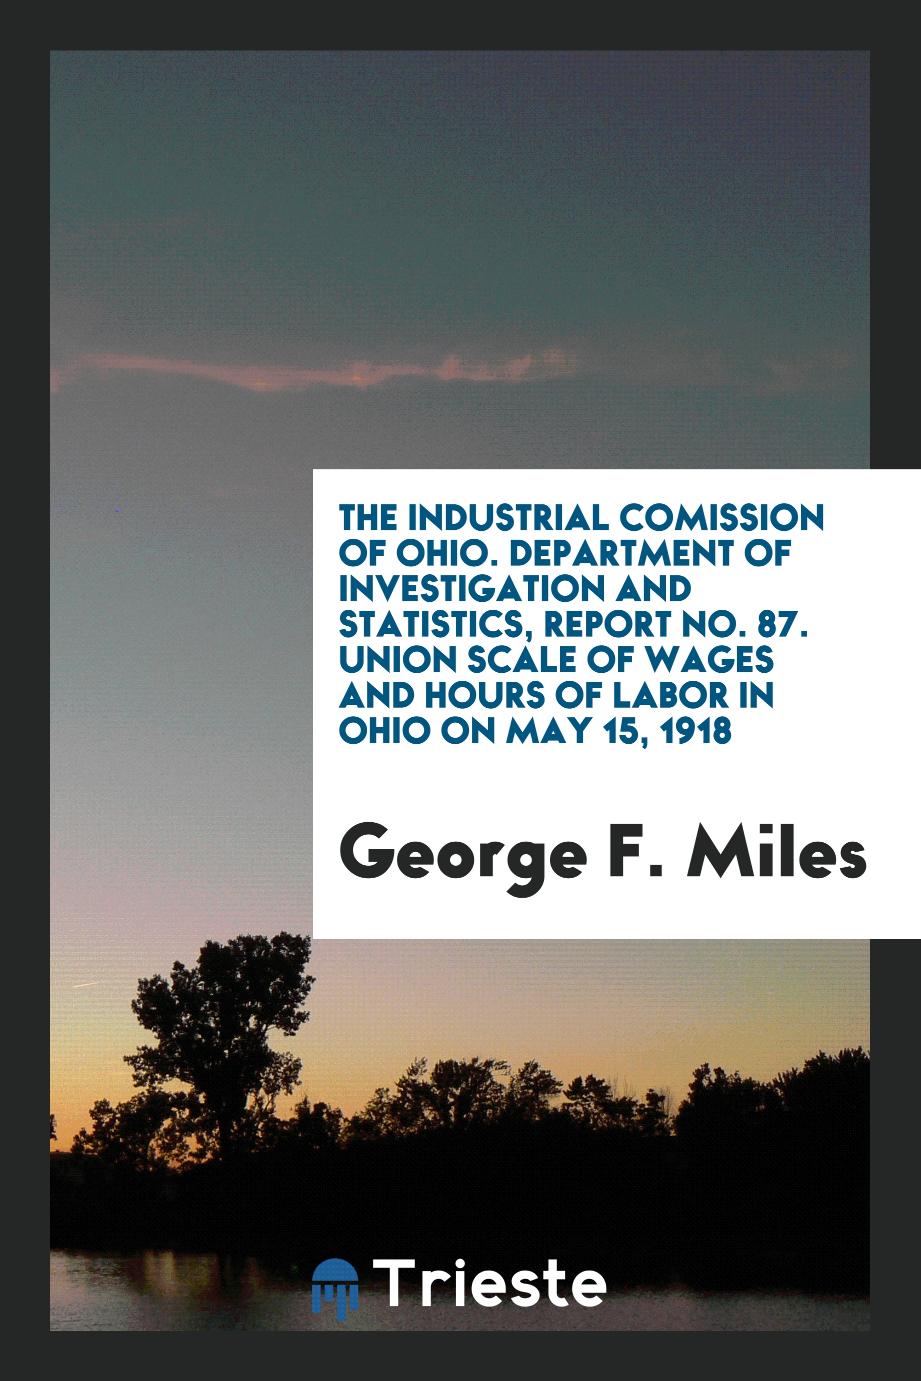 The industrial comission of Ohio. Department of investigation and statistics, report No. 87. Union Scale of Wages and Hours of Labor in Ohio on May 15, 1918